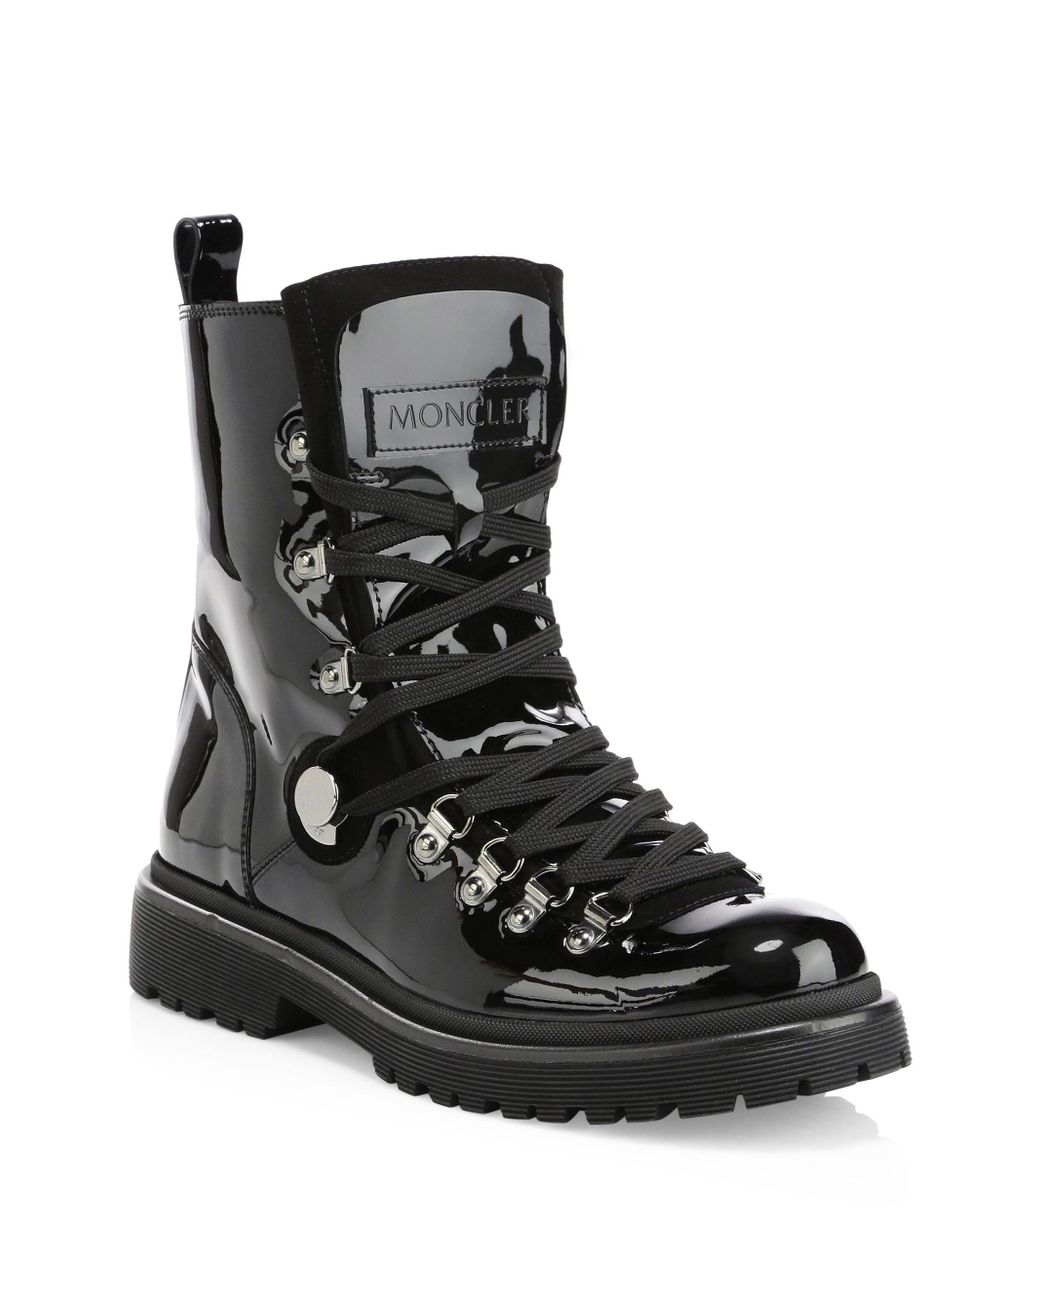 Moncler Patent Leather Combats Boots in Black | Lyst